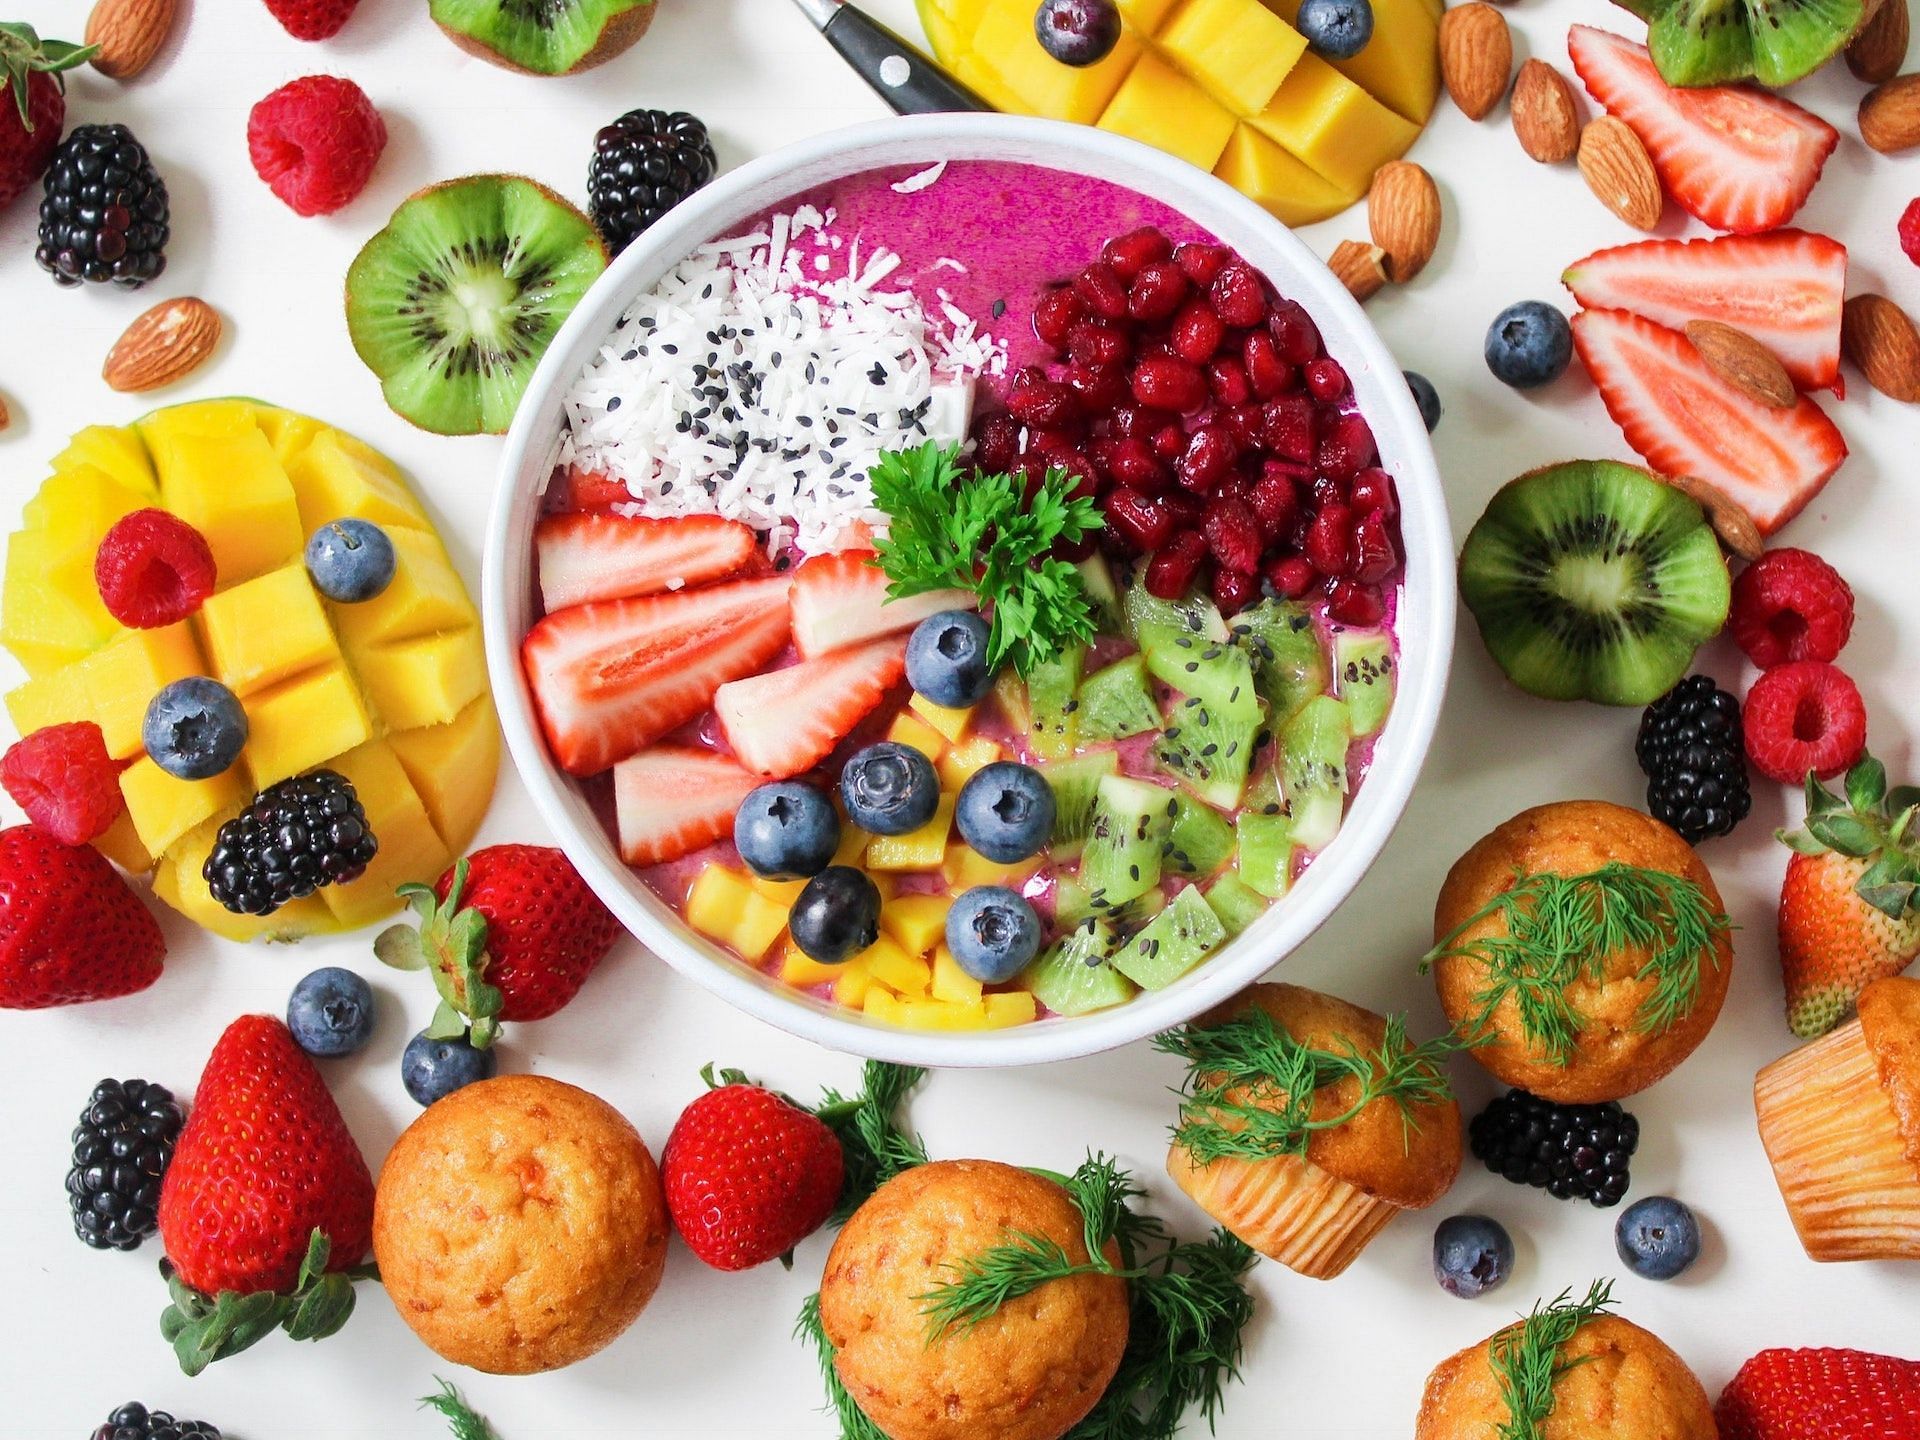 Add lots of fruits and vegetables to your diet. (Photo via Pexels/Jane Doan)